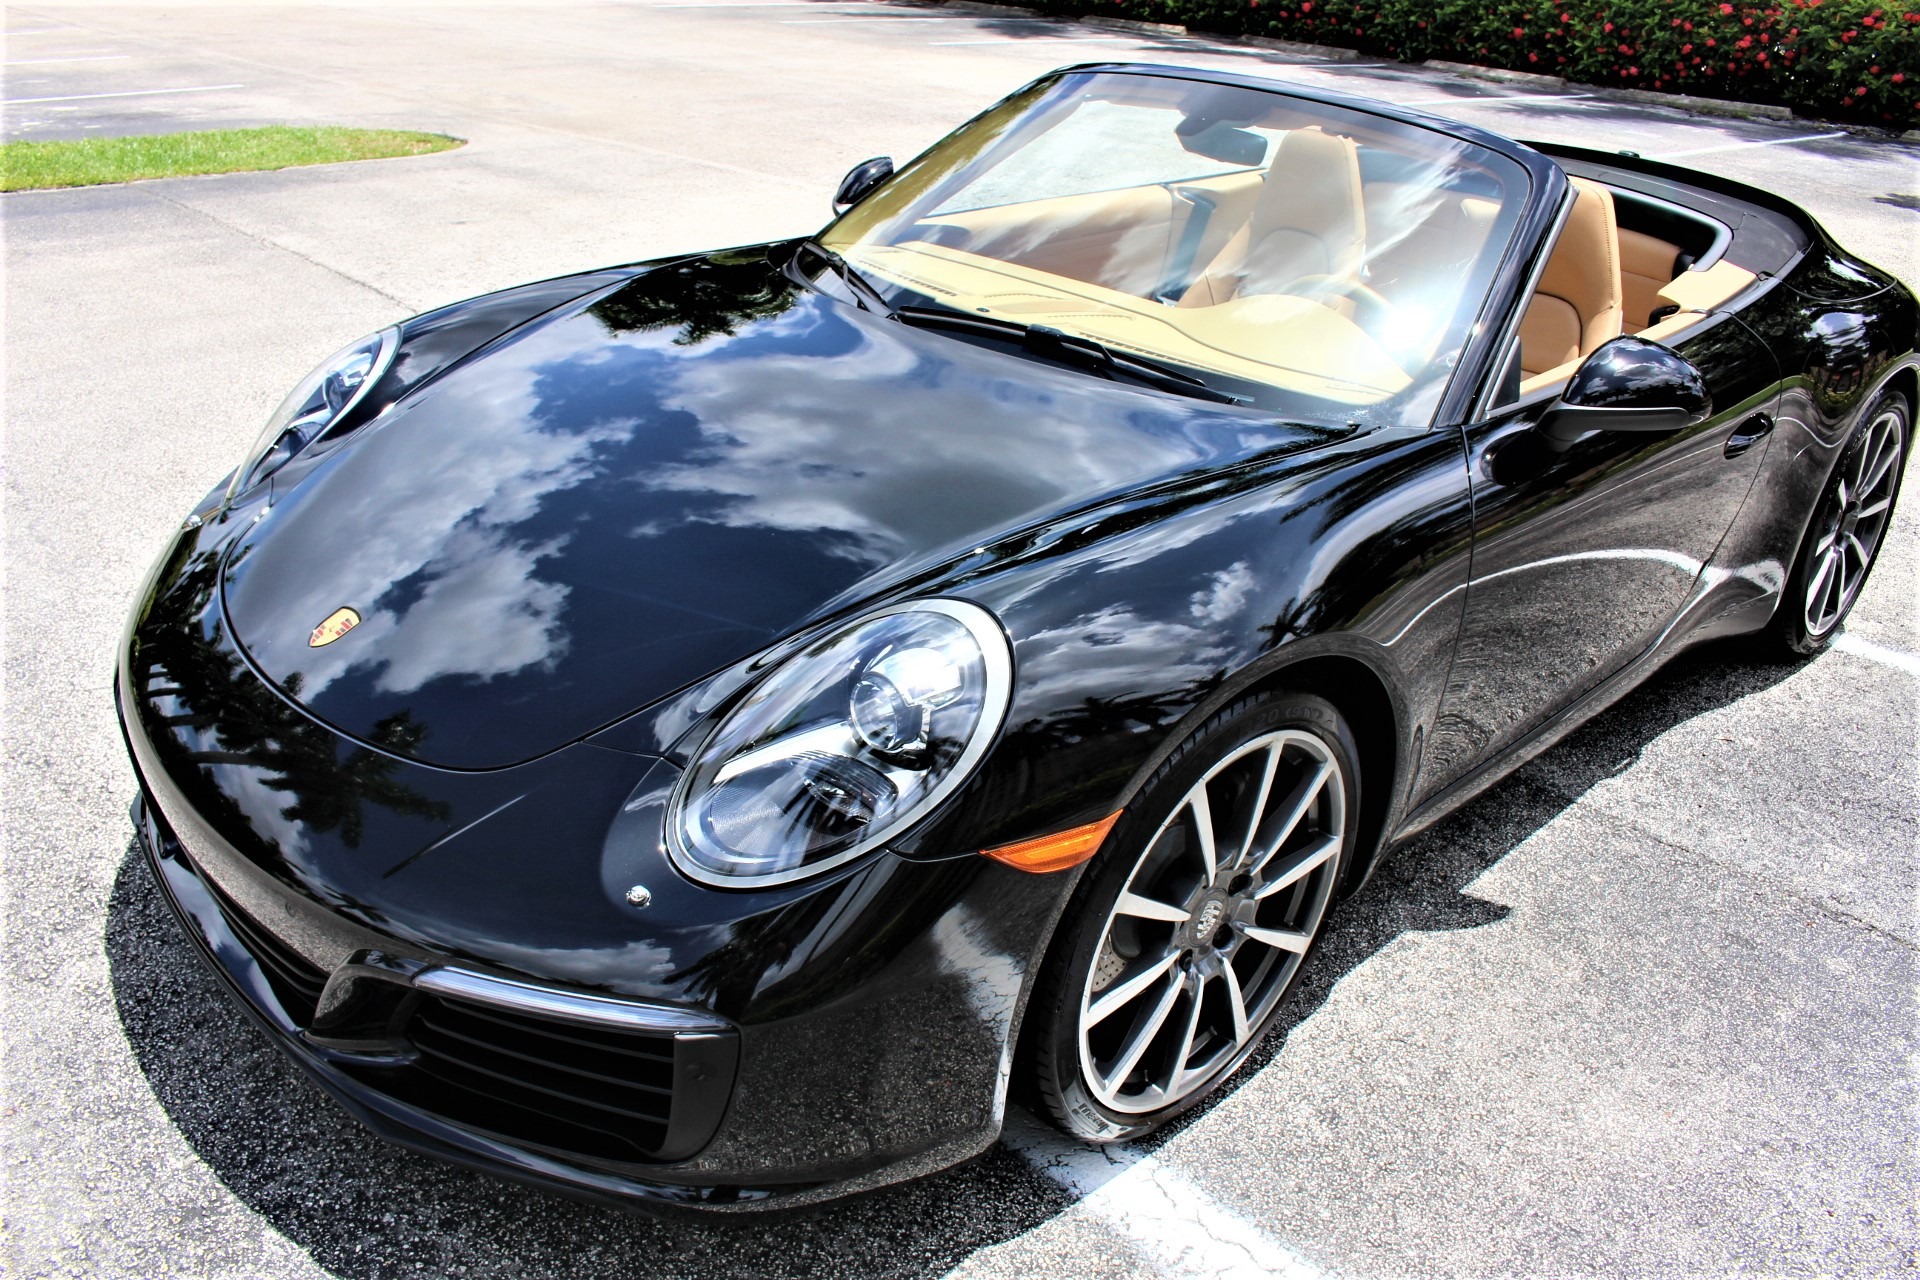 Used 2017 Porsche 911 Carrera for sale Sold at The Gables Sports Cars in Miami FL 33146 2